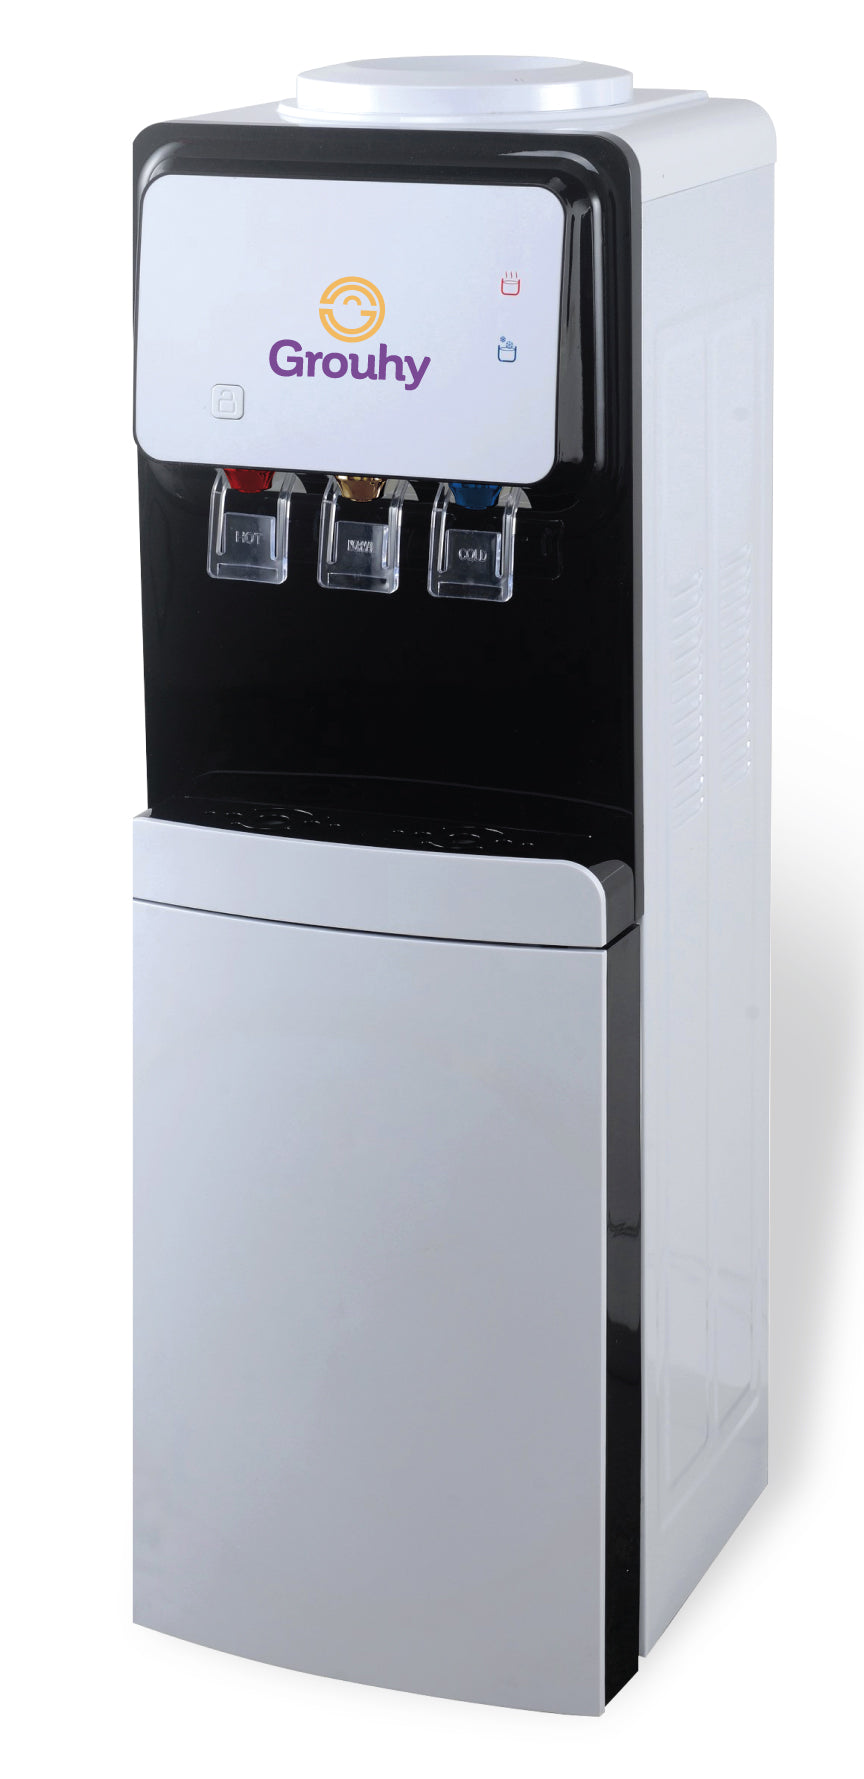  Grouhy Hot, Cold And Normal Water Dispenser